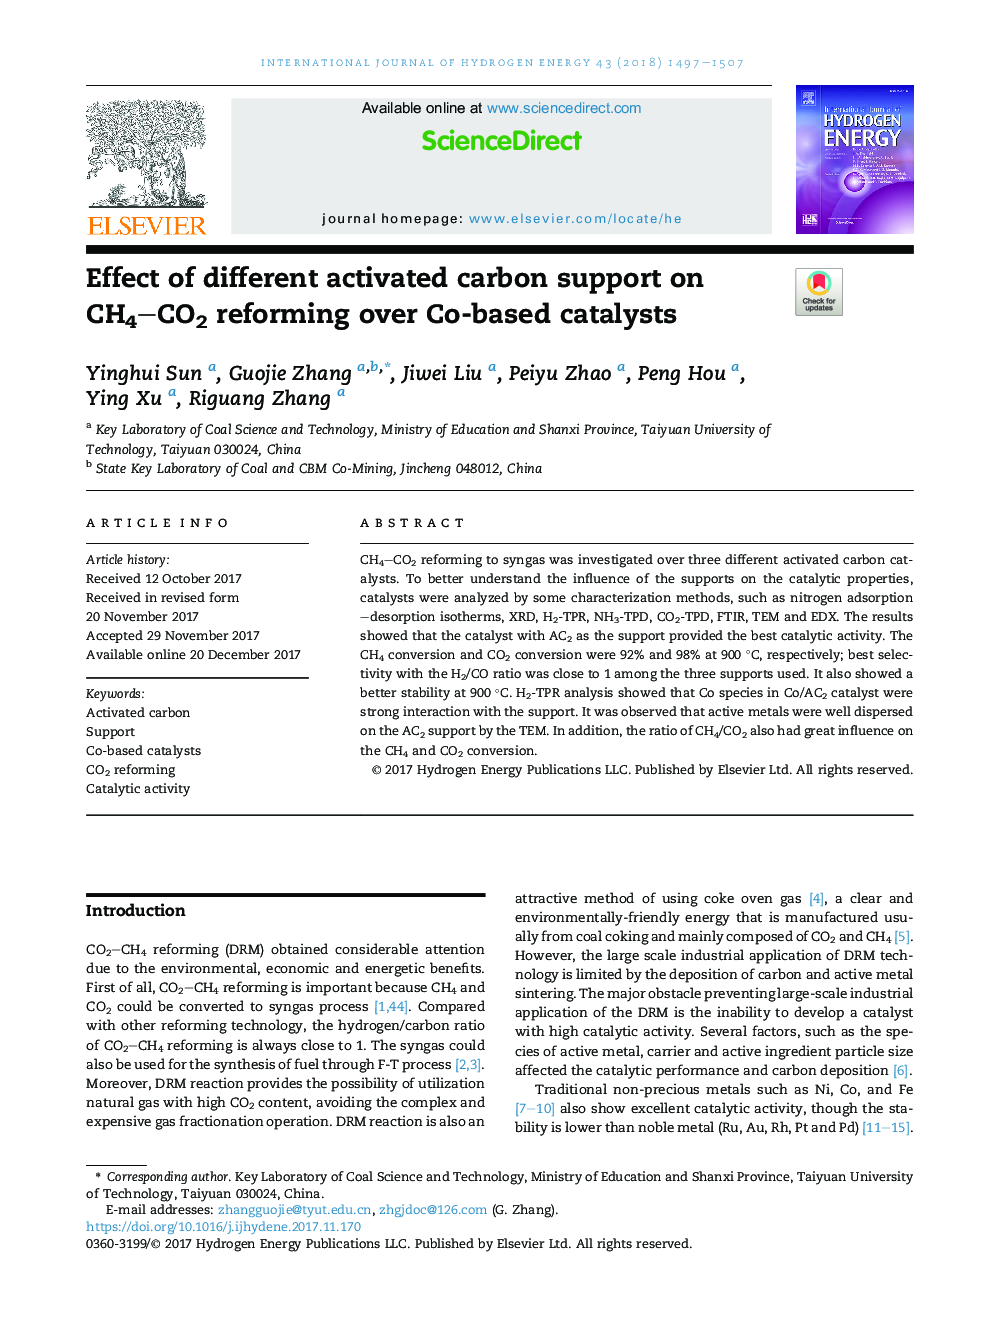 Effect of different activated carbon support on CH4CO2 reforming over Co-based catalysts